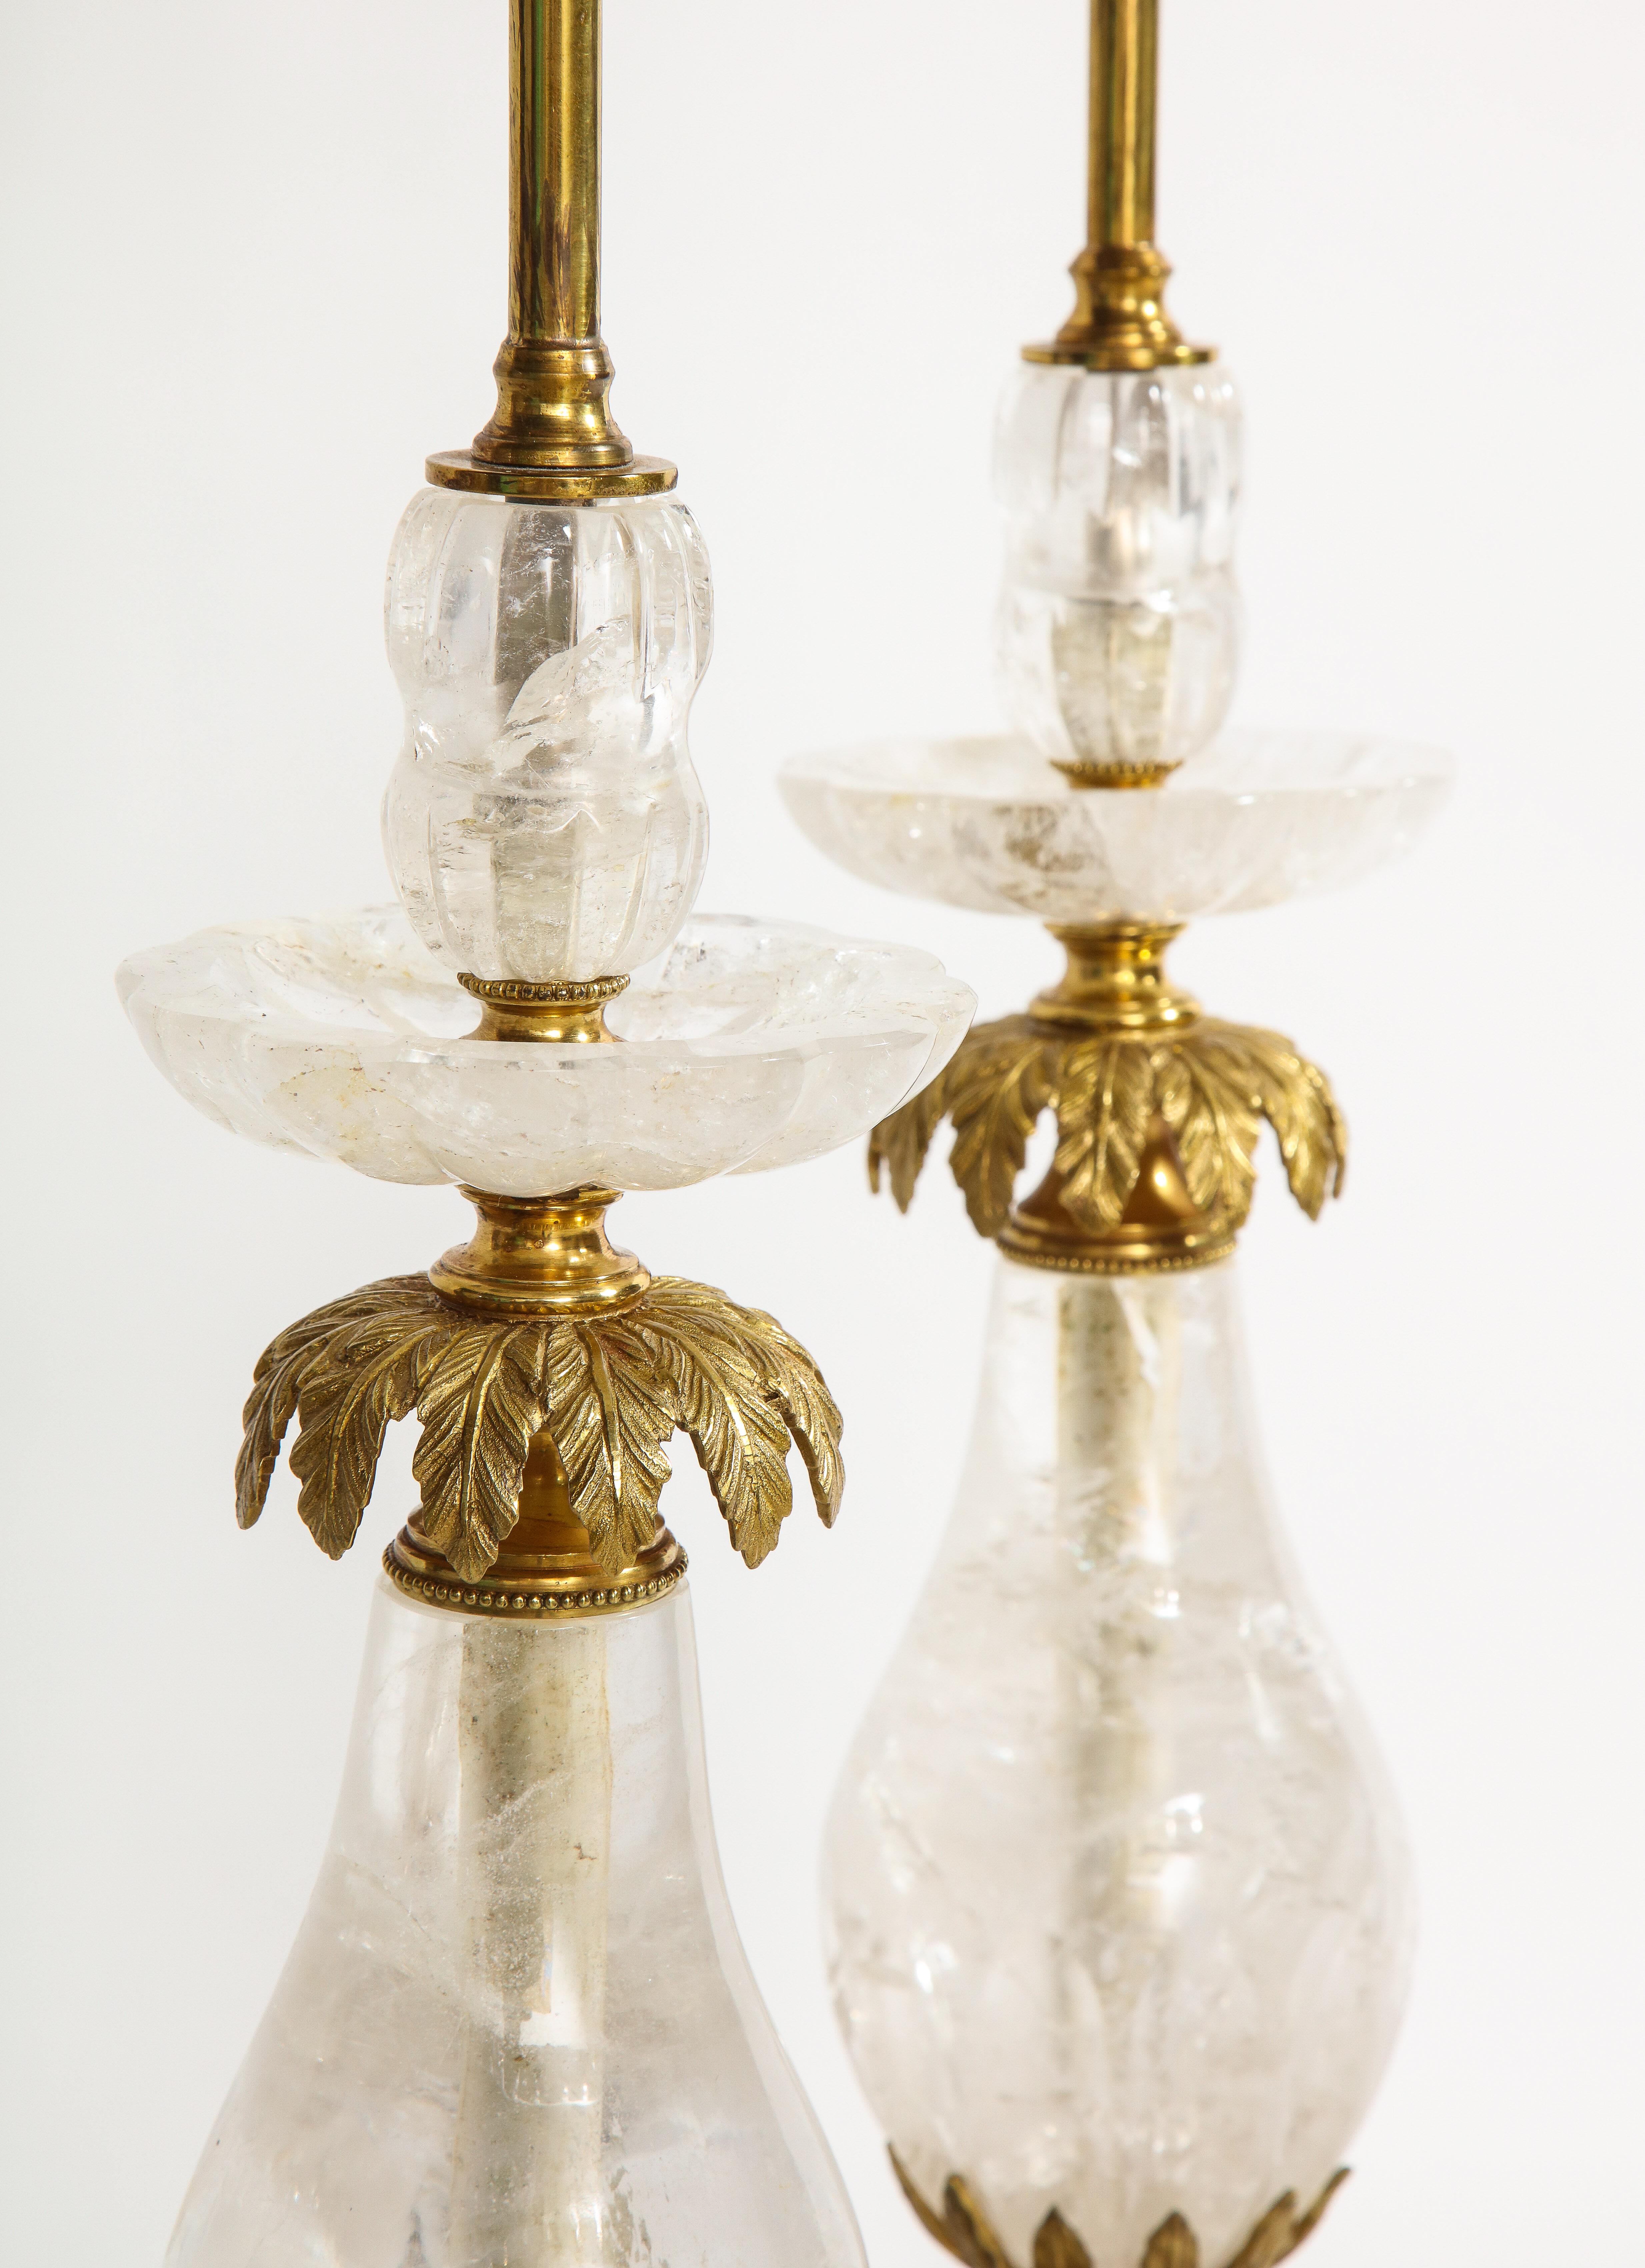 Pair of Art Deco Ormolu Mounted Palm Tree Form Rock Crystal Quartz Lamps For Sale 1